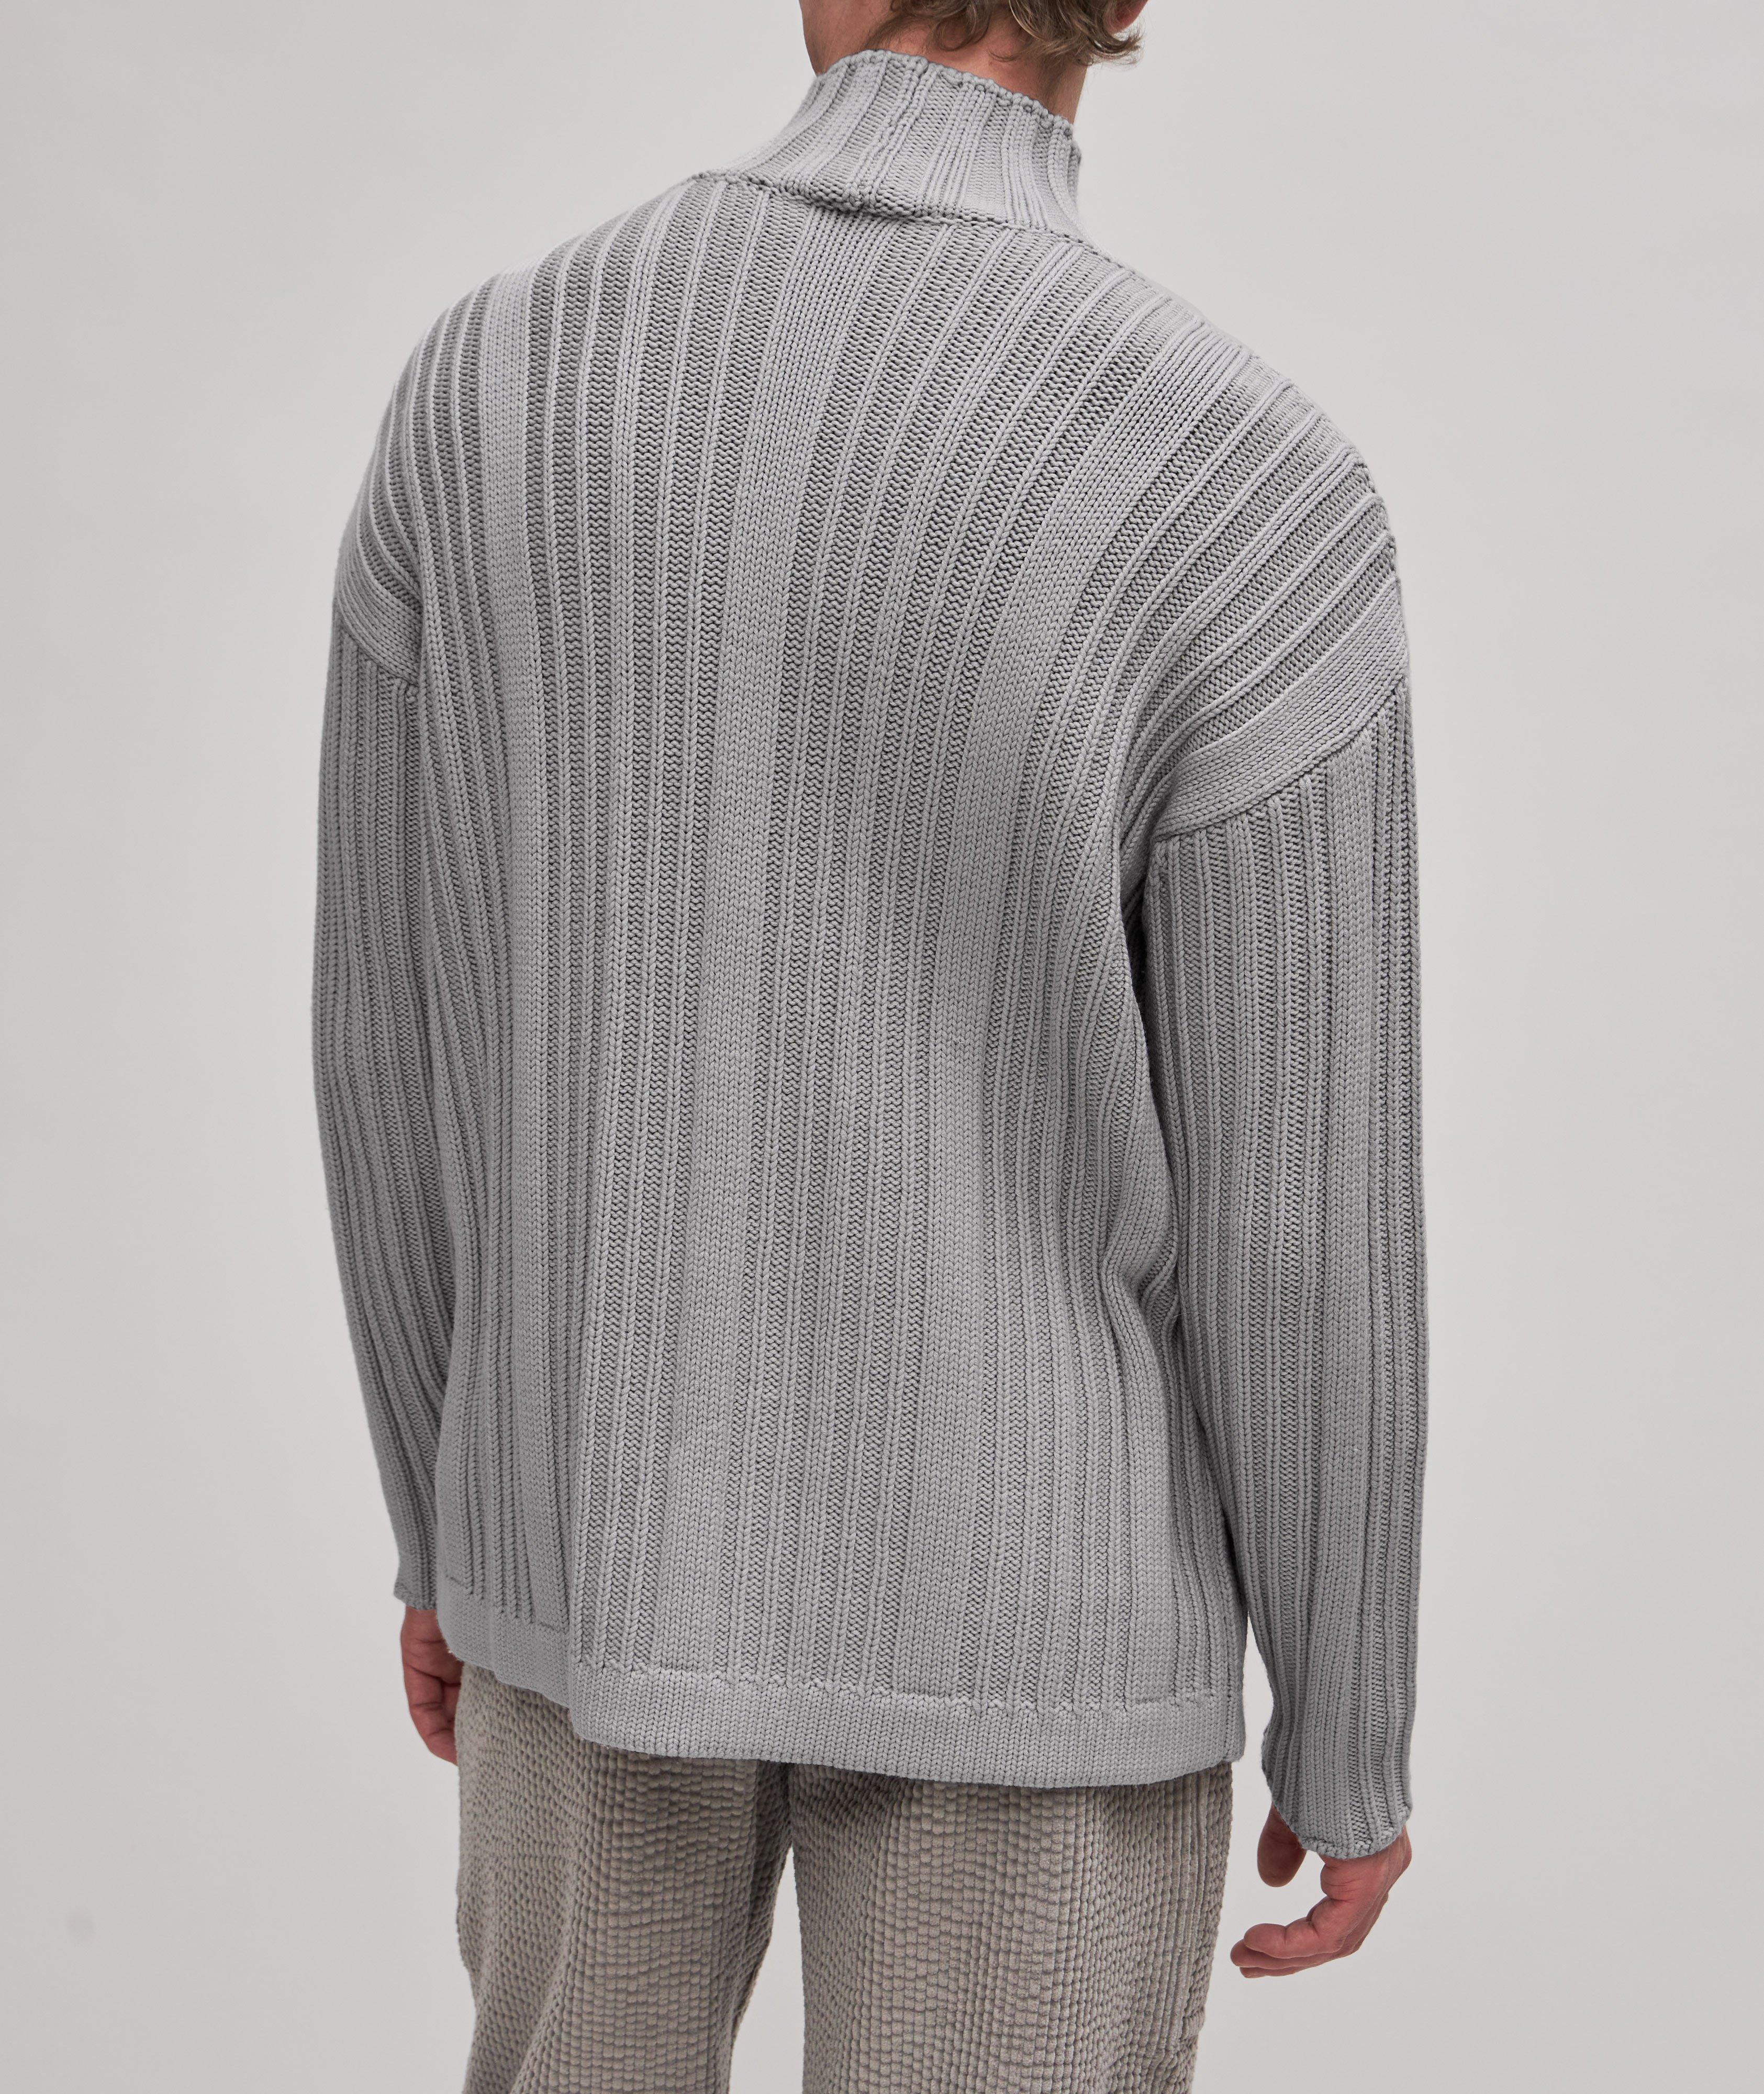 Virgin Wool Thich Rib-Knitted Turtleneck Sweater image 2